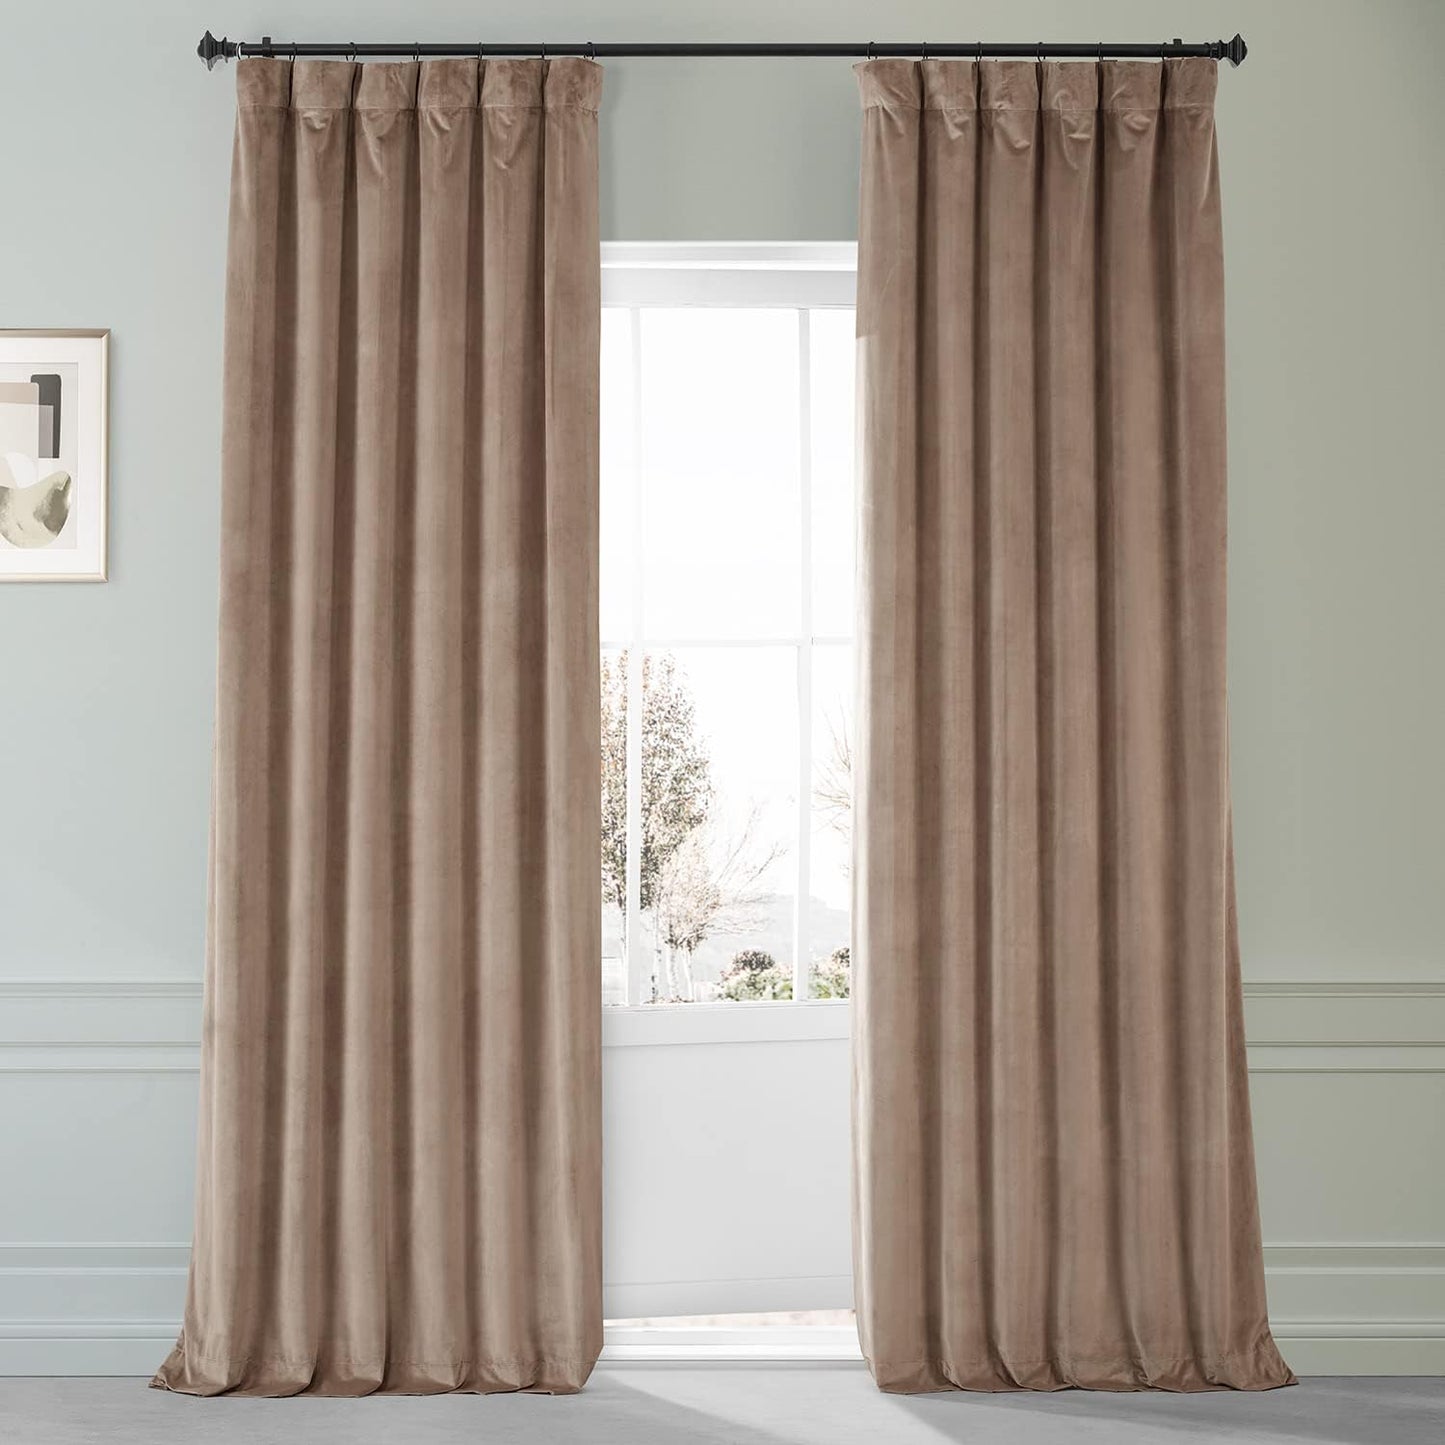 HPD HALF PRICE DRAPES Blackout Solid Thermal Insulated Window Curtain 50 X 96 Signature Plush Velvet Curtains for Bedroom & Living Room (1 Panel), VPYC-SBO198593-96, Diva Cream  Exclusive Fabrics & Furnishings Pashmina Taupe 50 X 108 